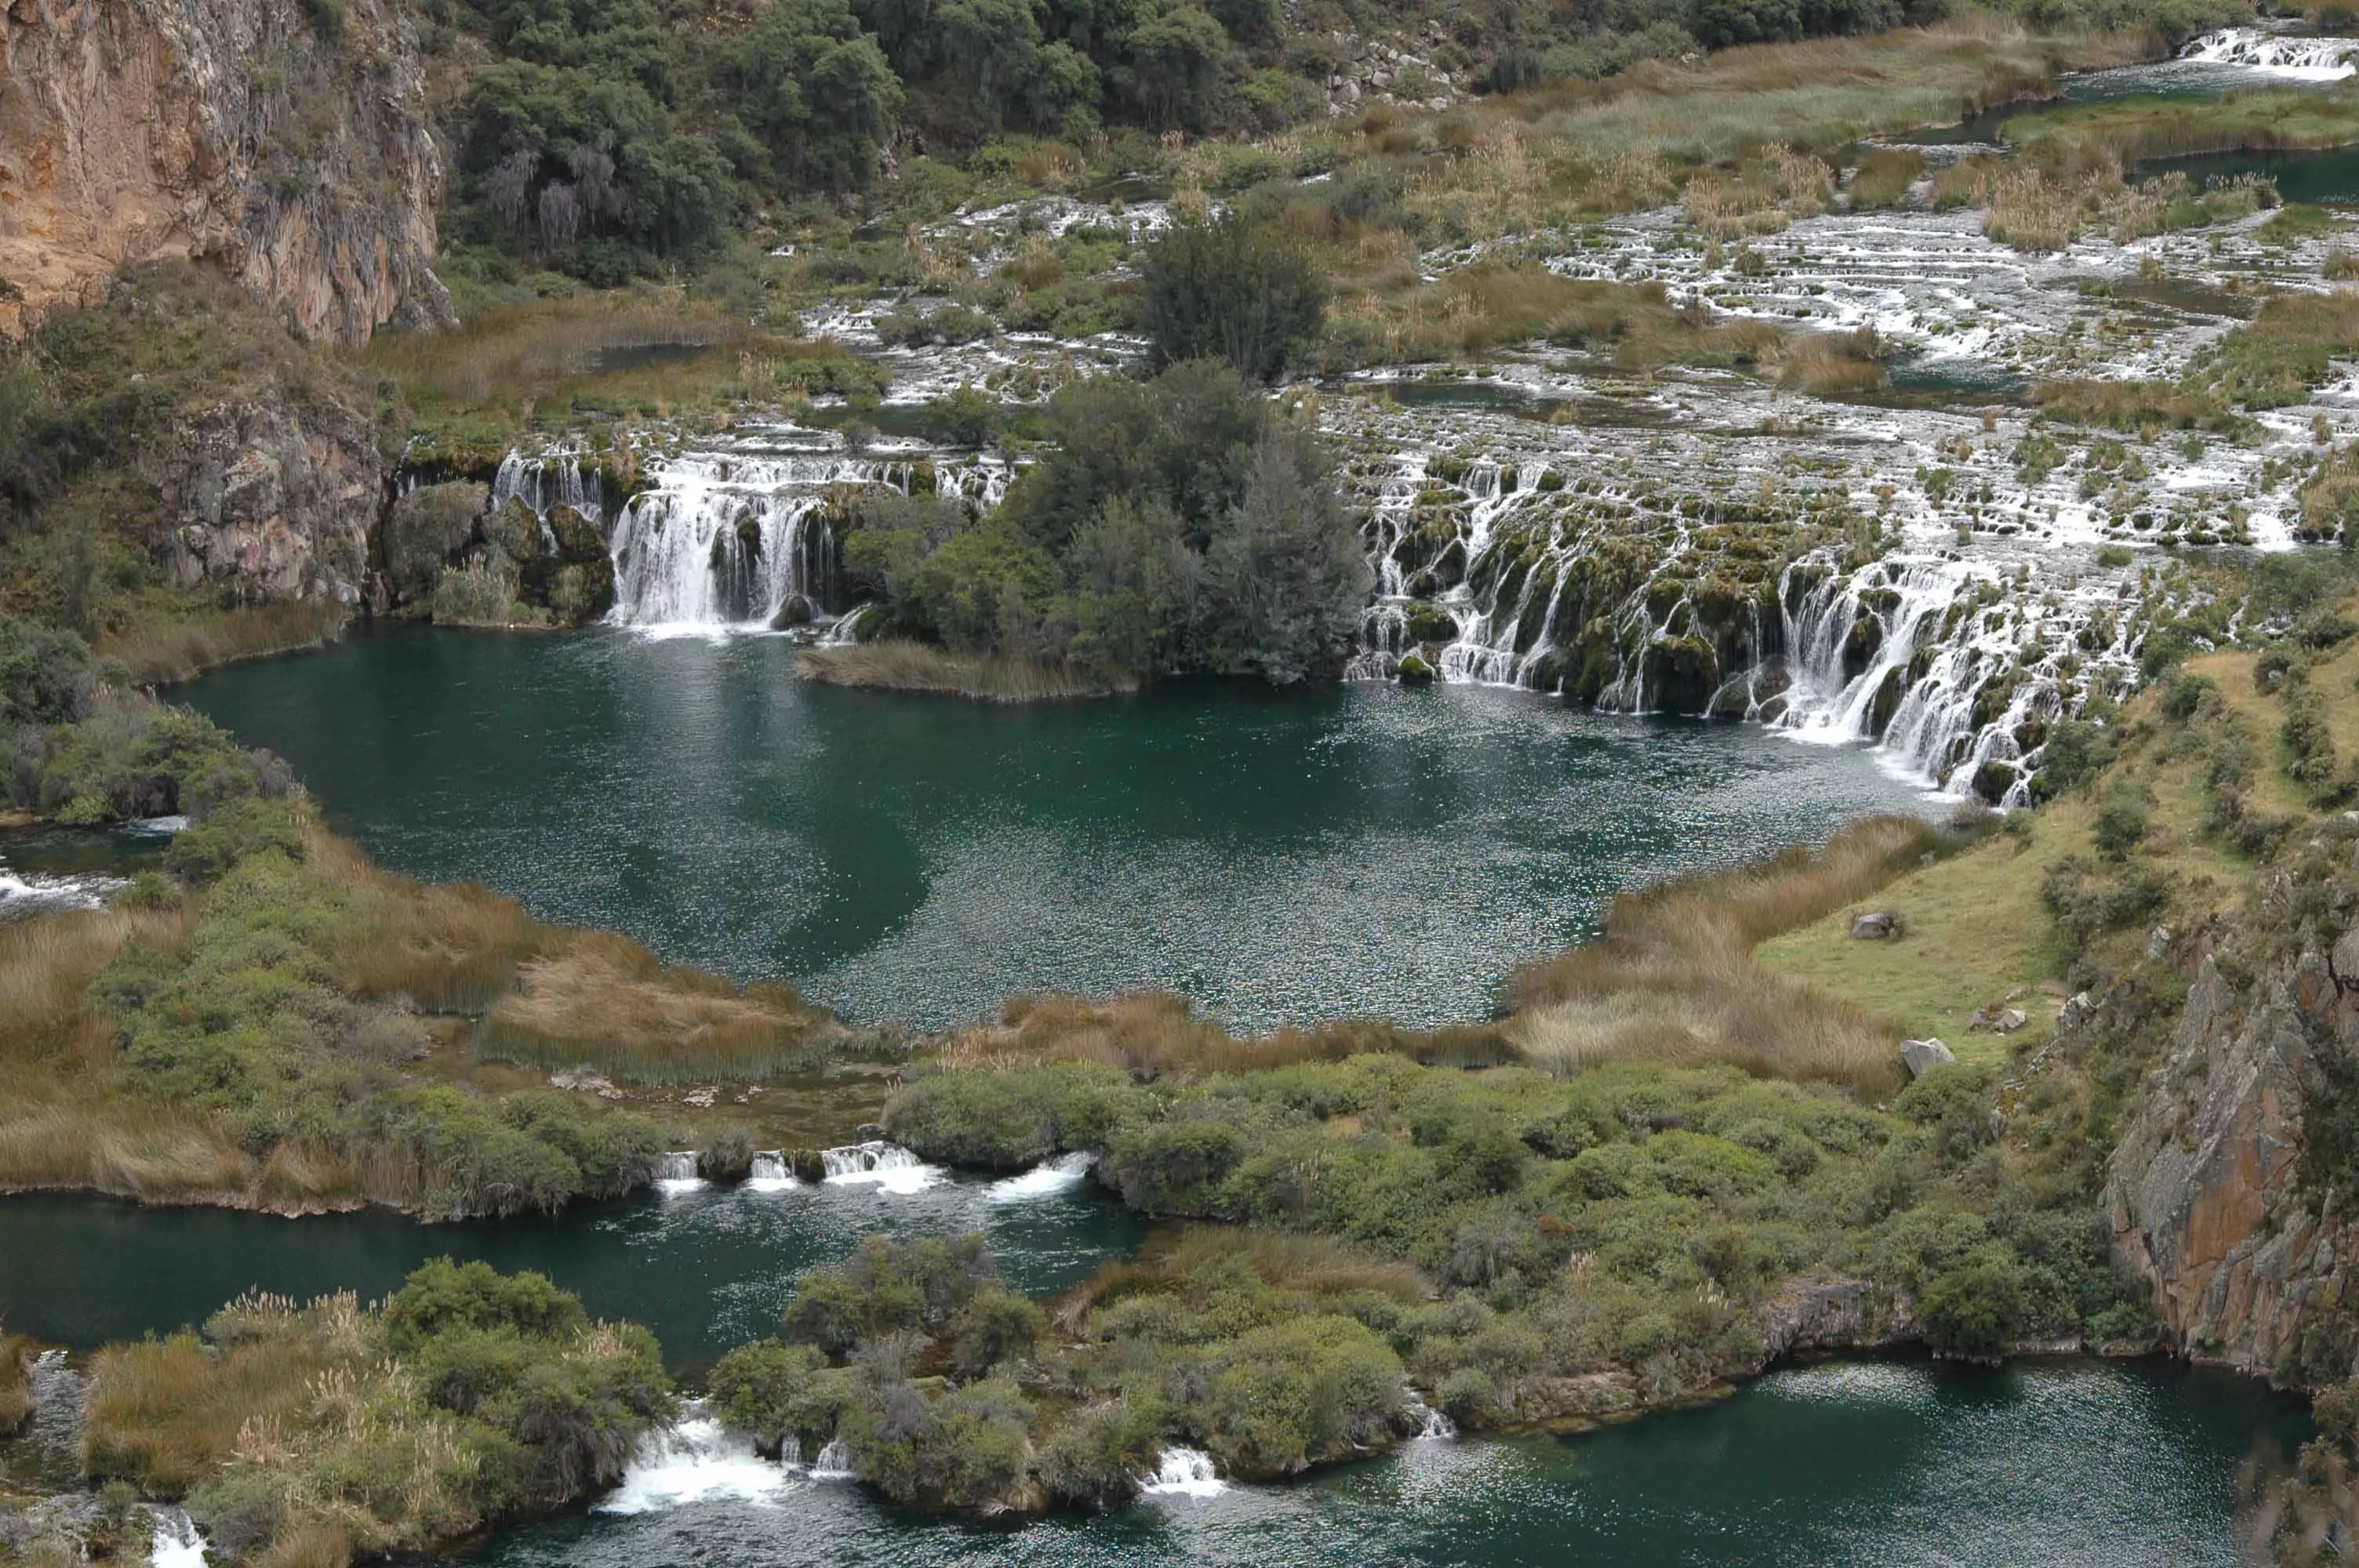 Nor Yauyos-Cochas Landscape Reserve in Peru, South America | Nature Reserves - Rated 3.7